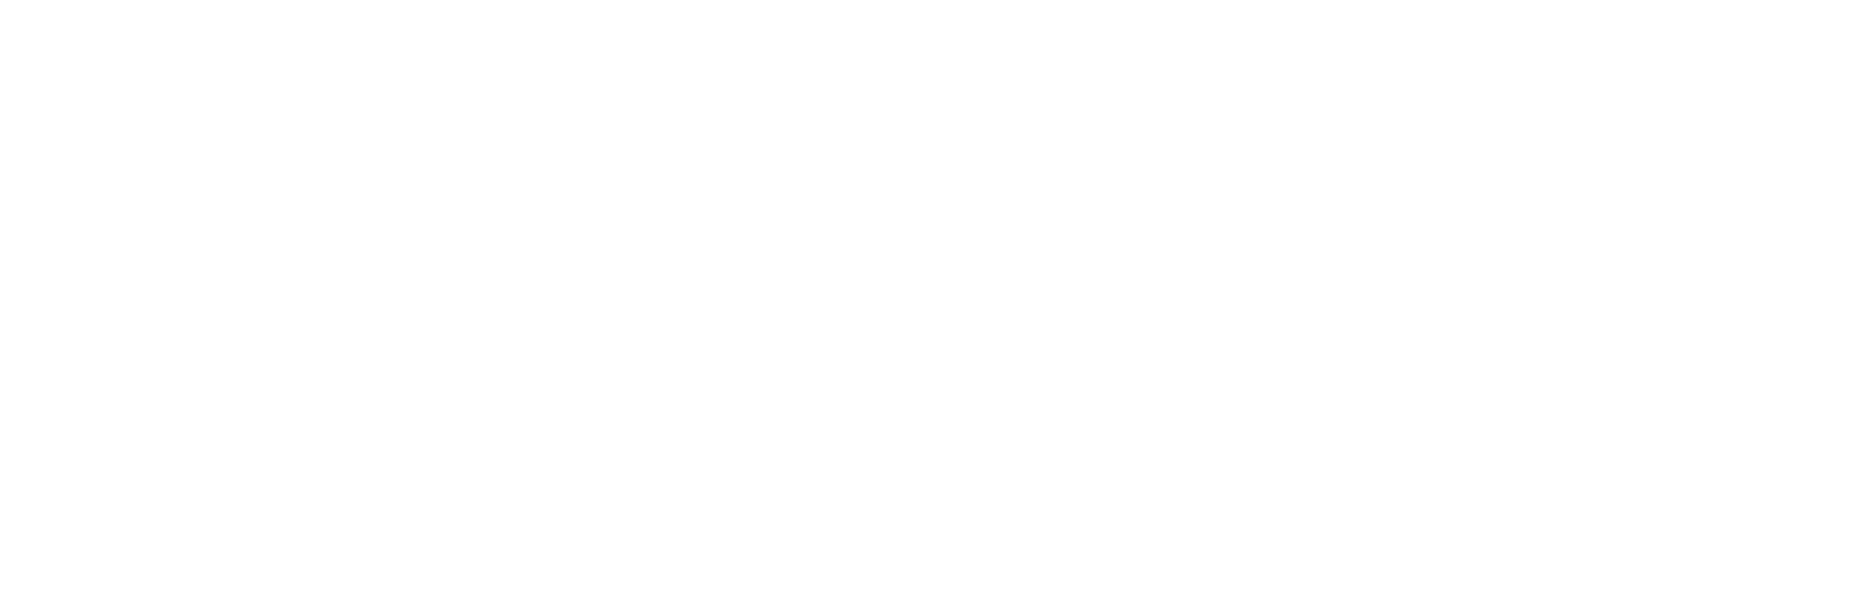 Day2Day Pet Services logo